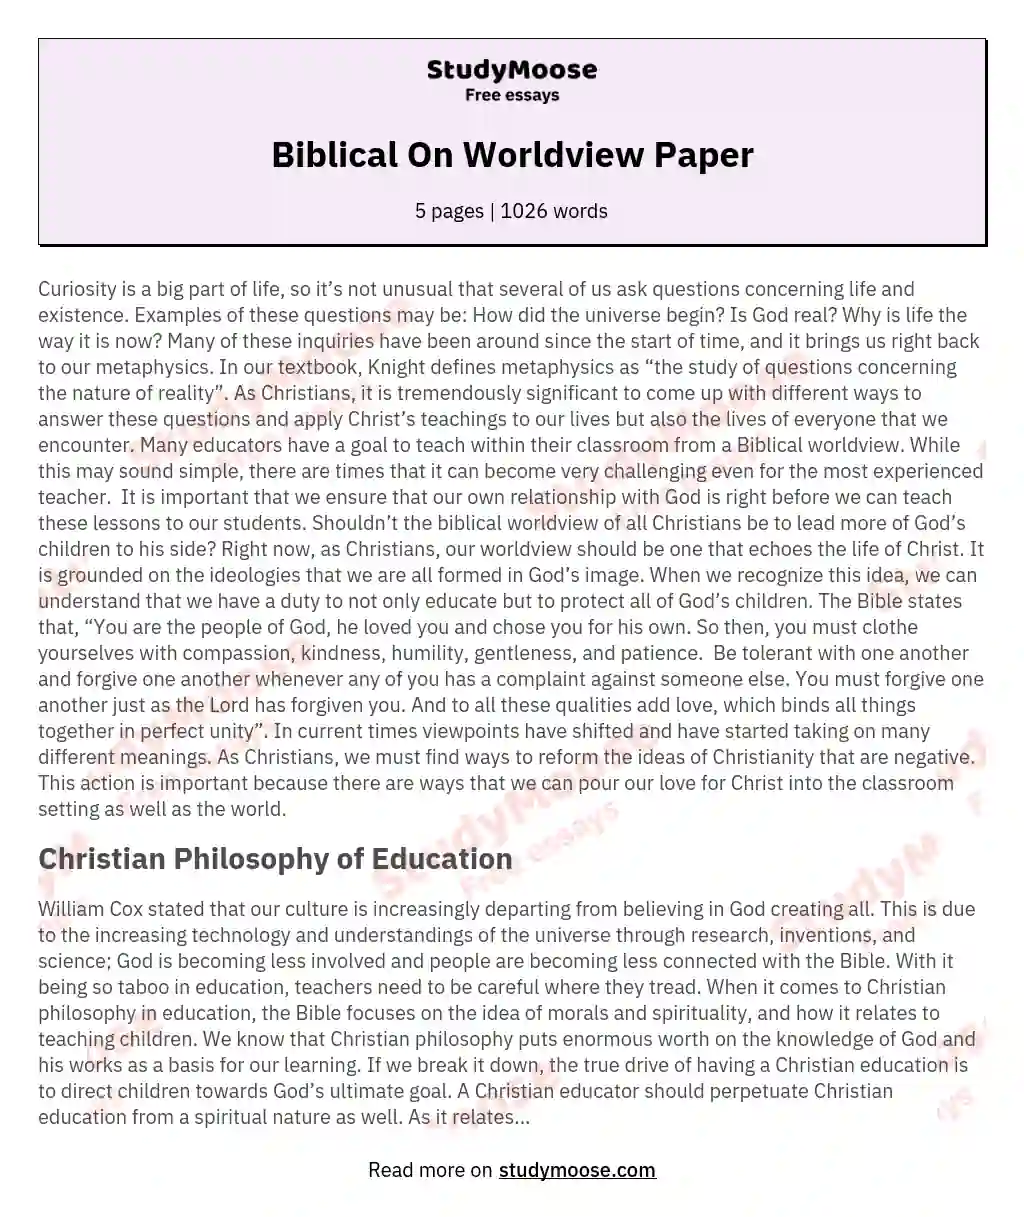 Biblical On Worldview Paper essay